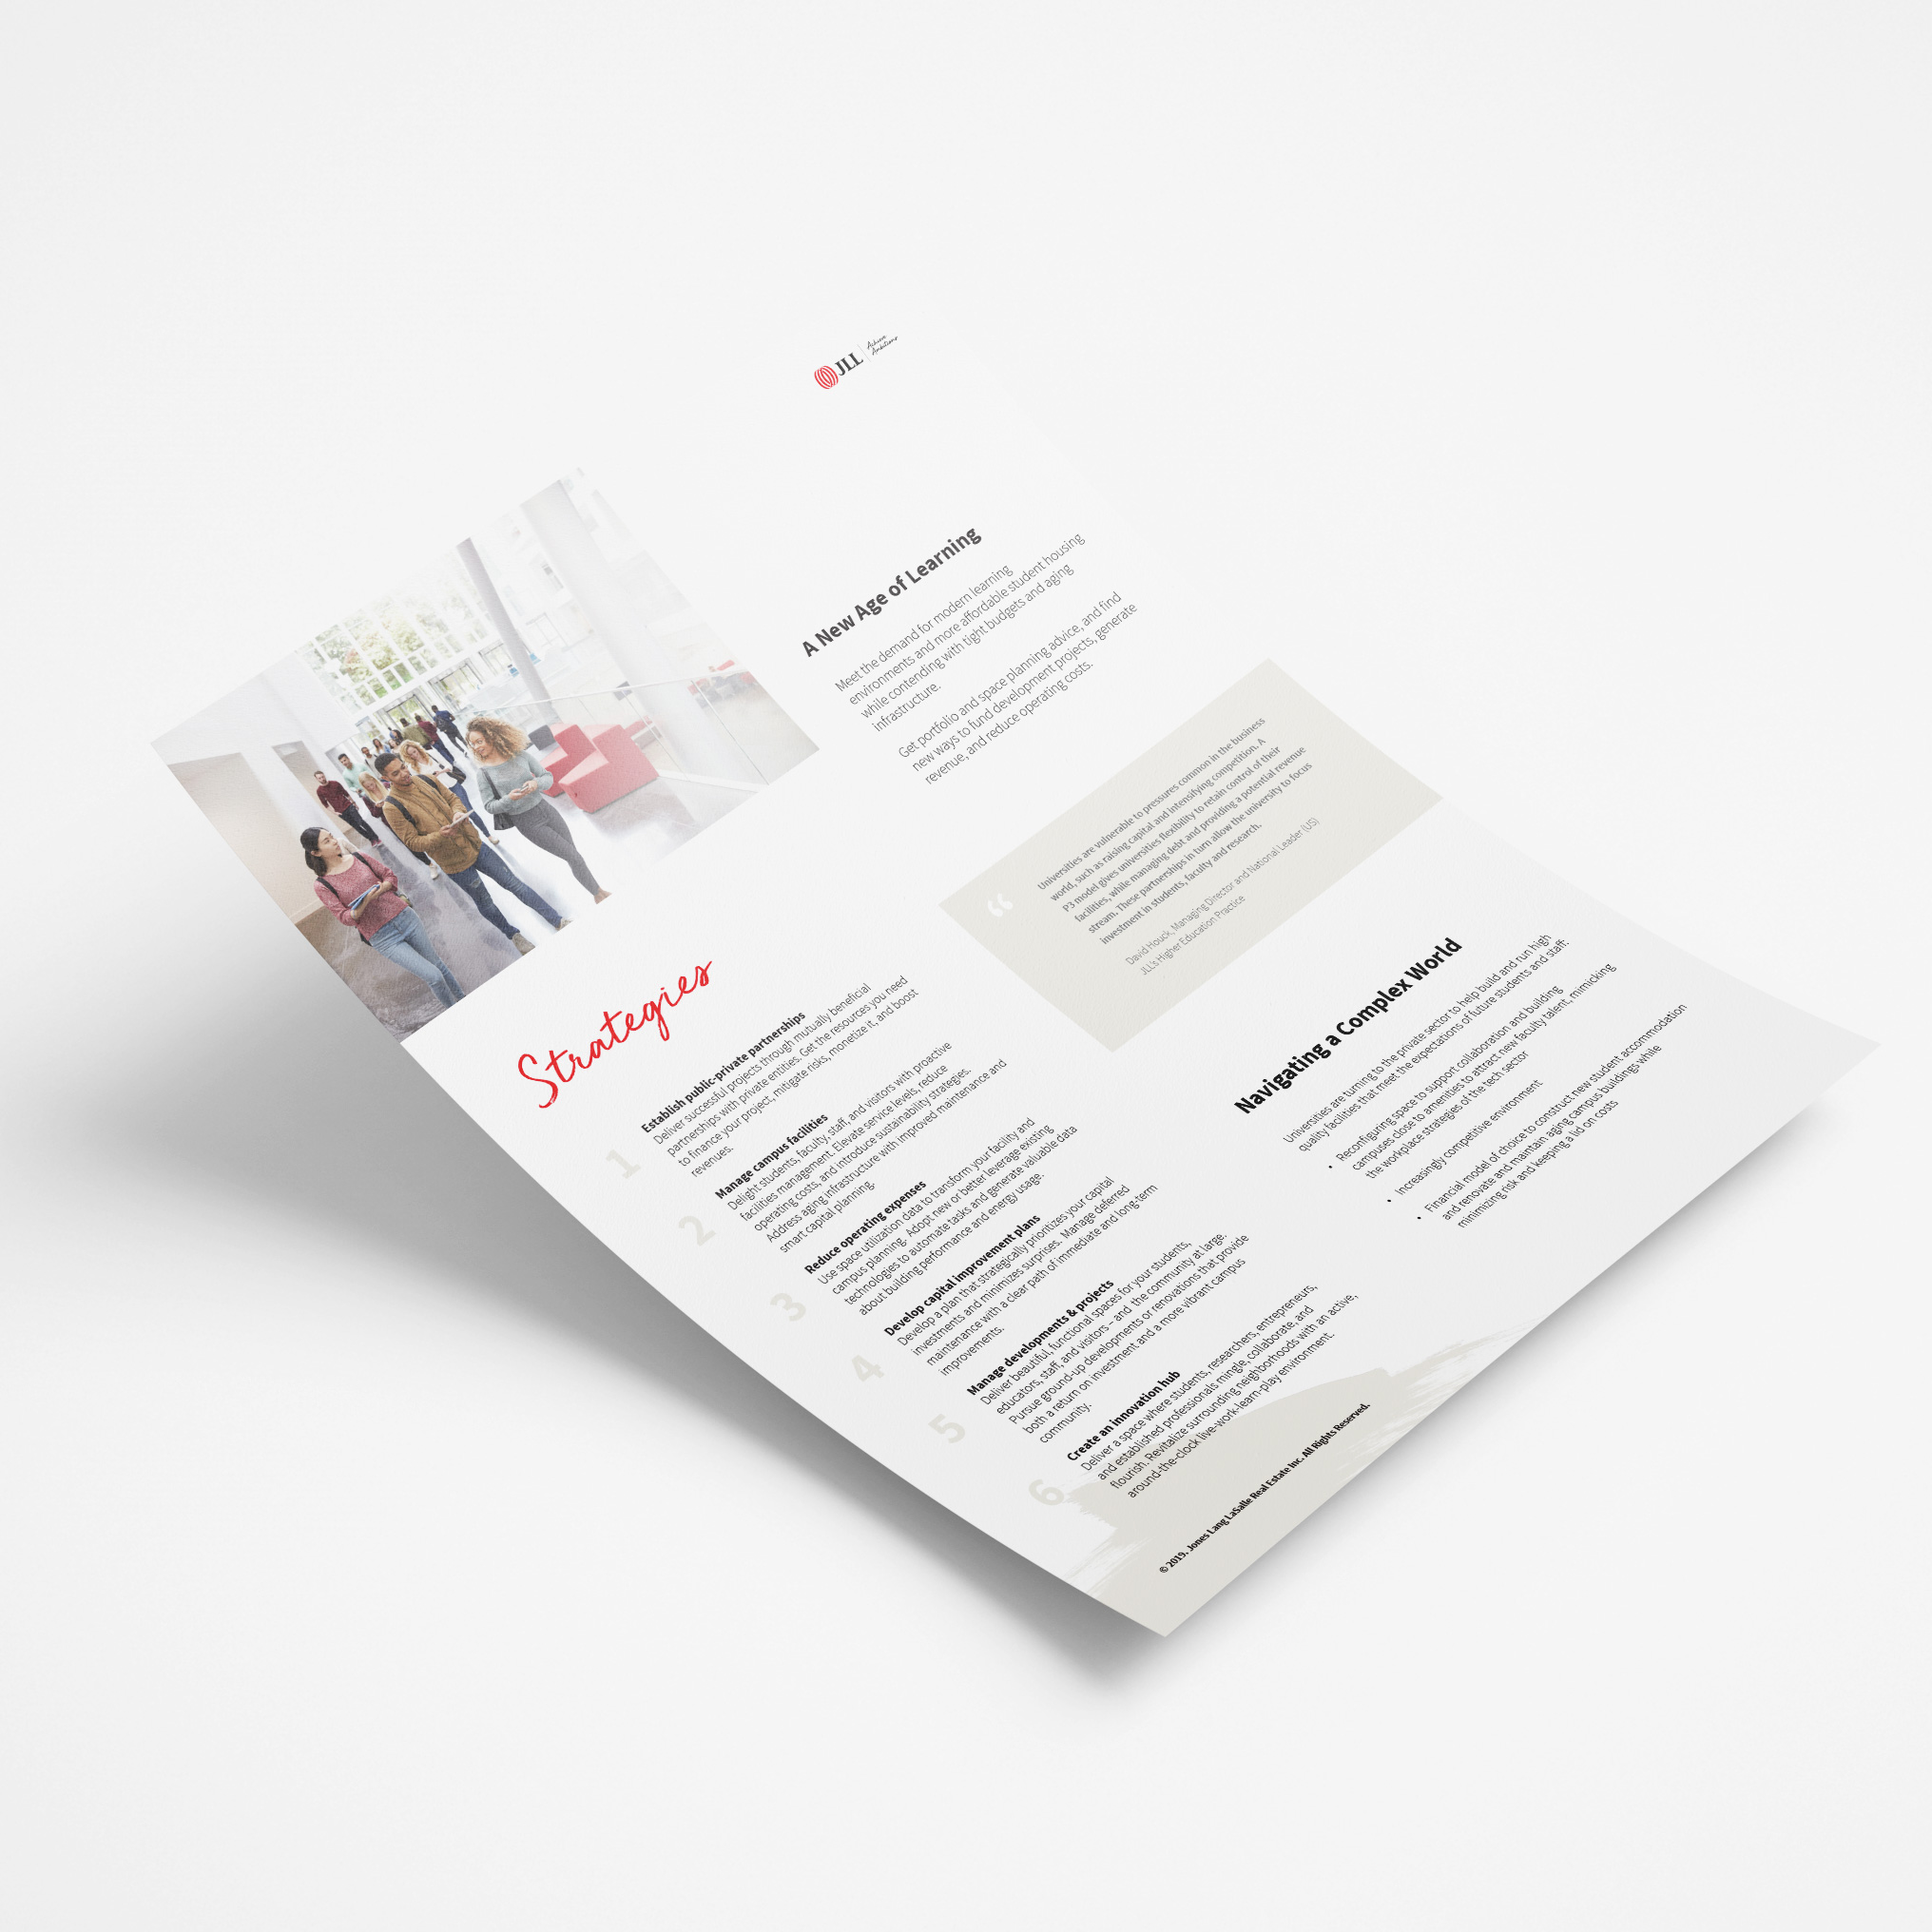 JLL Promotional Material